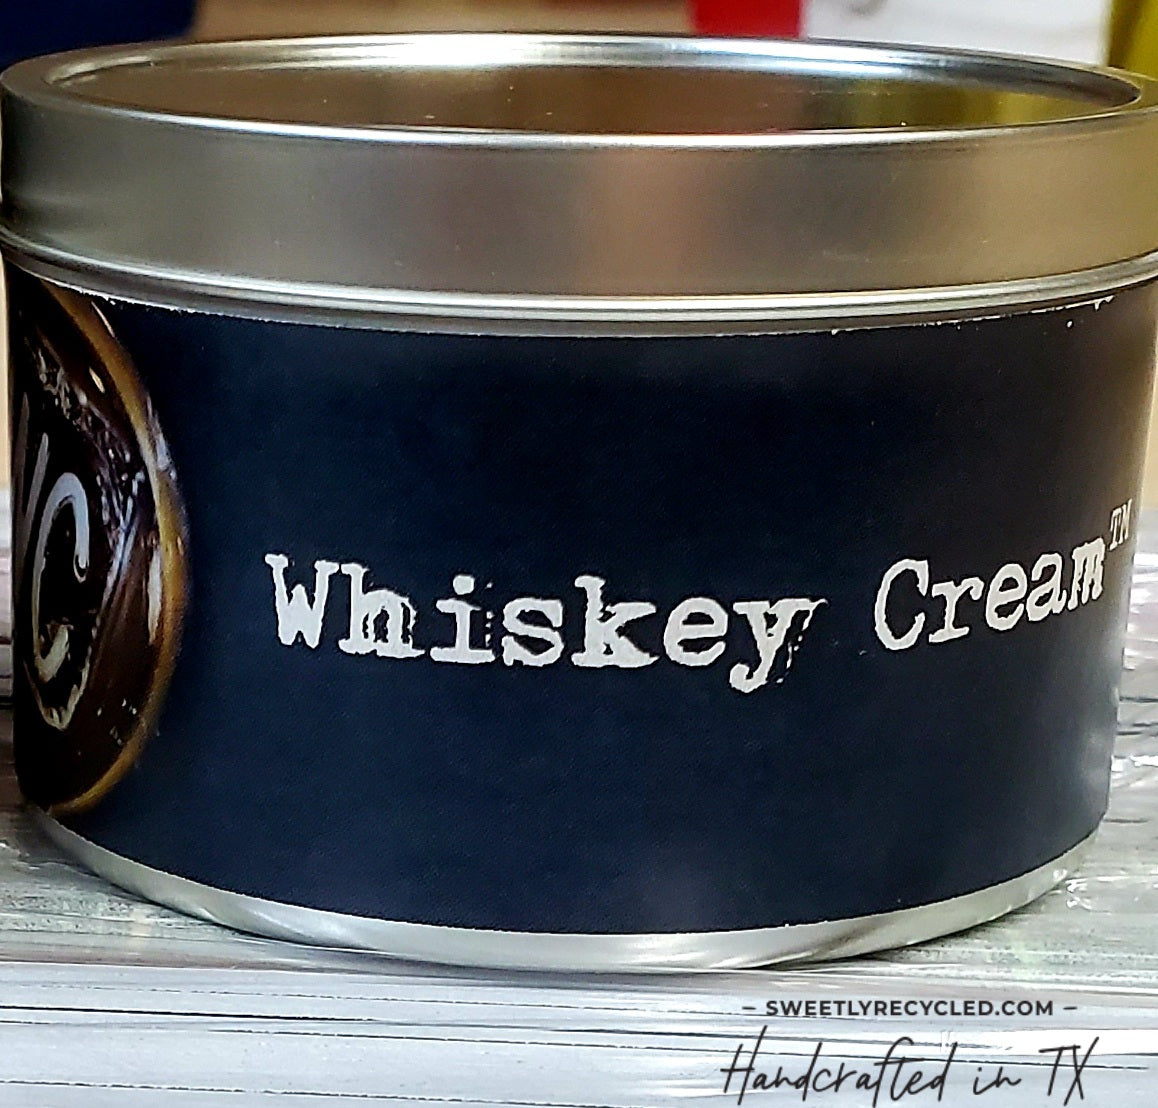 8 oz Metal Tins seen at Whiskey Cake TM, The Ranch & Haywire- Whiskey Cream TM, Man Cave Tm, On the Rocks & Rosemary